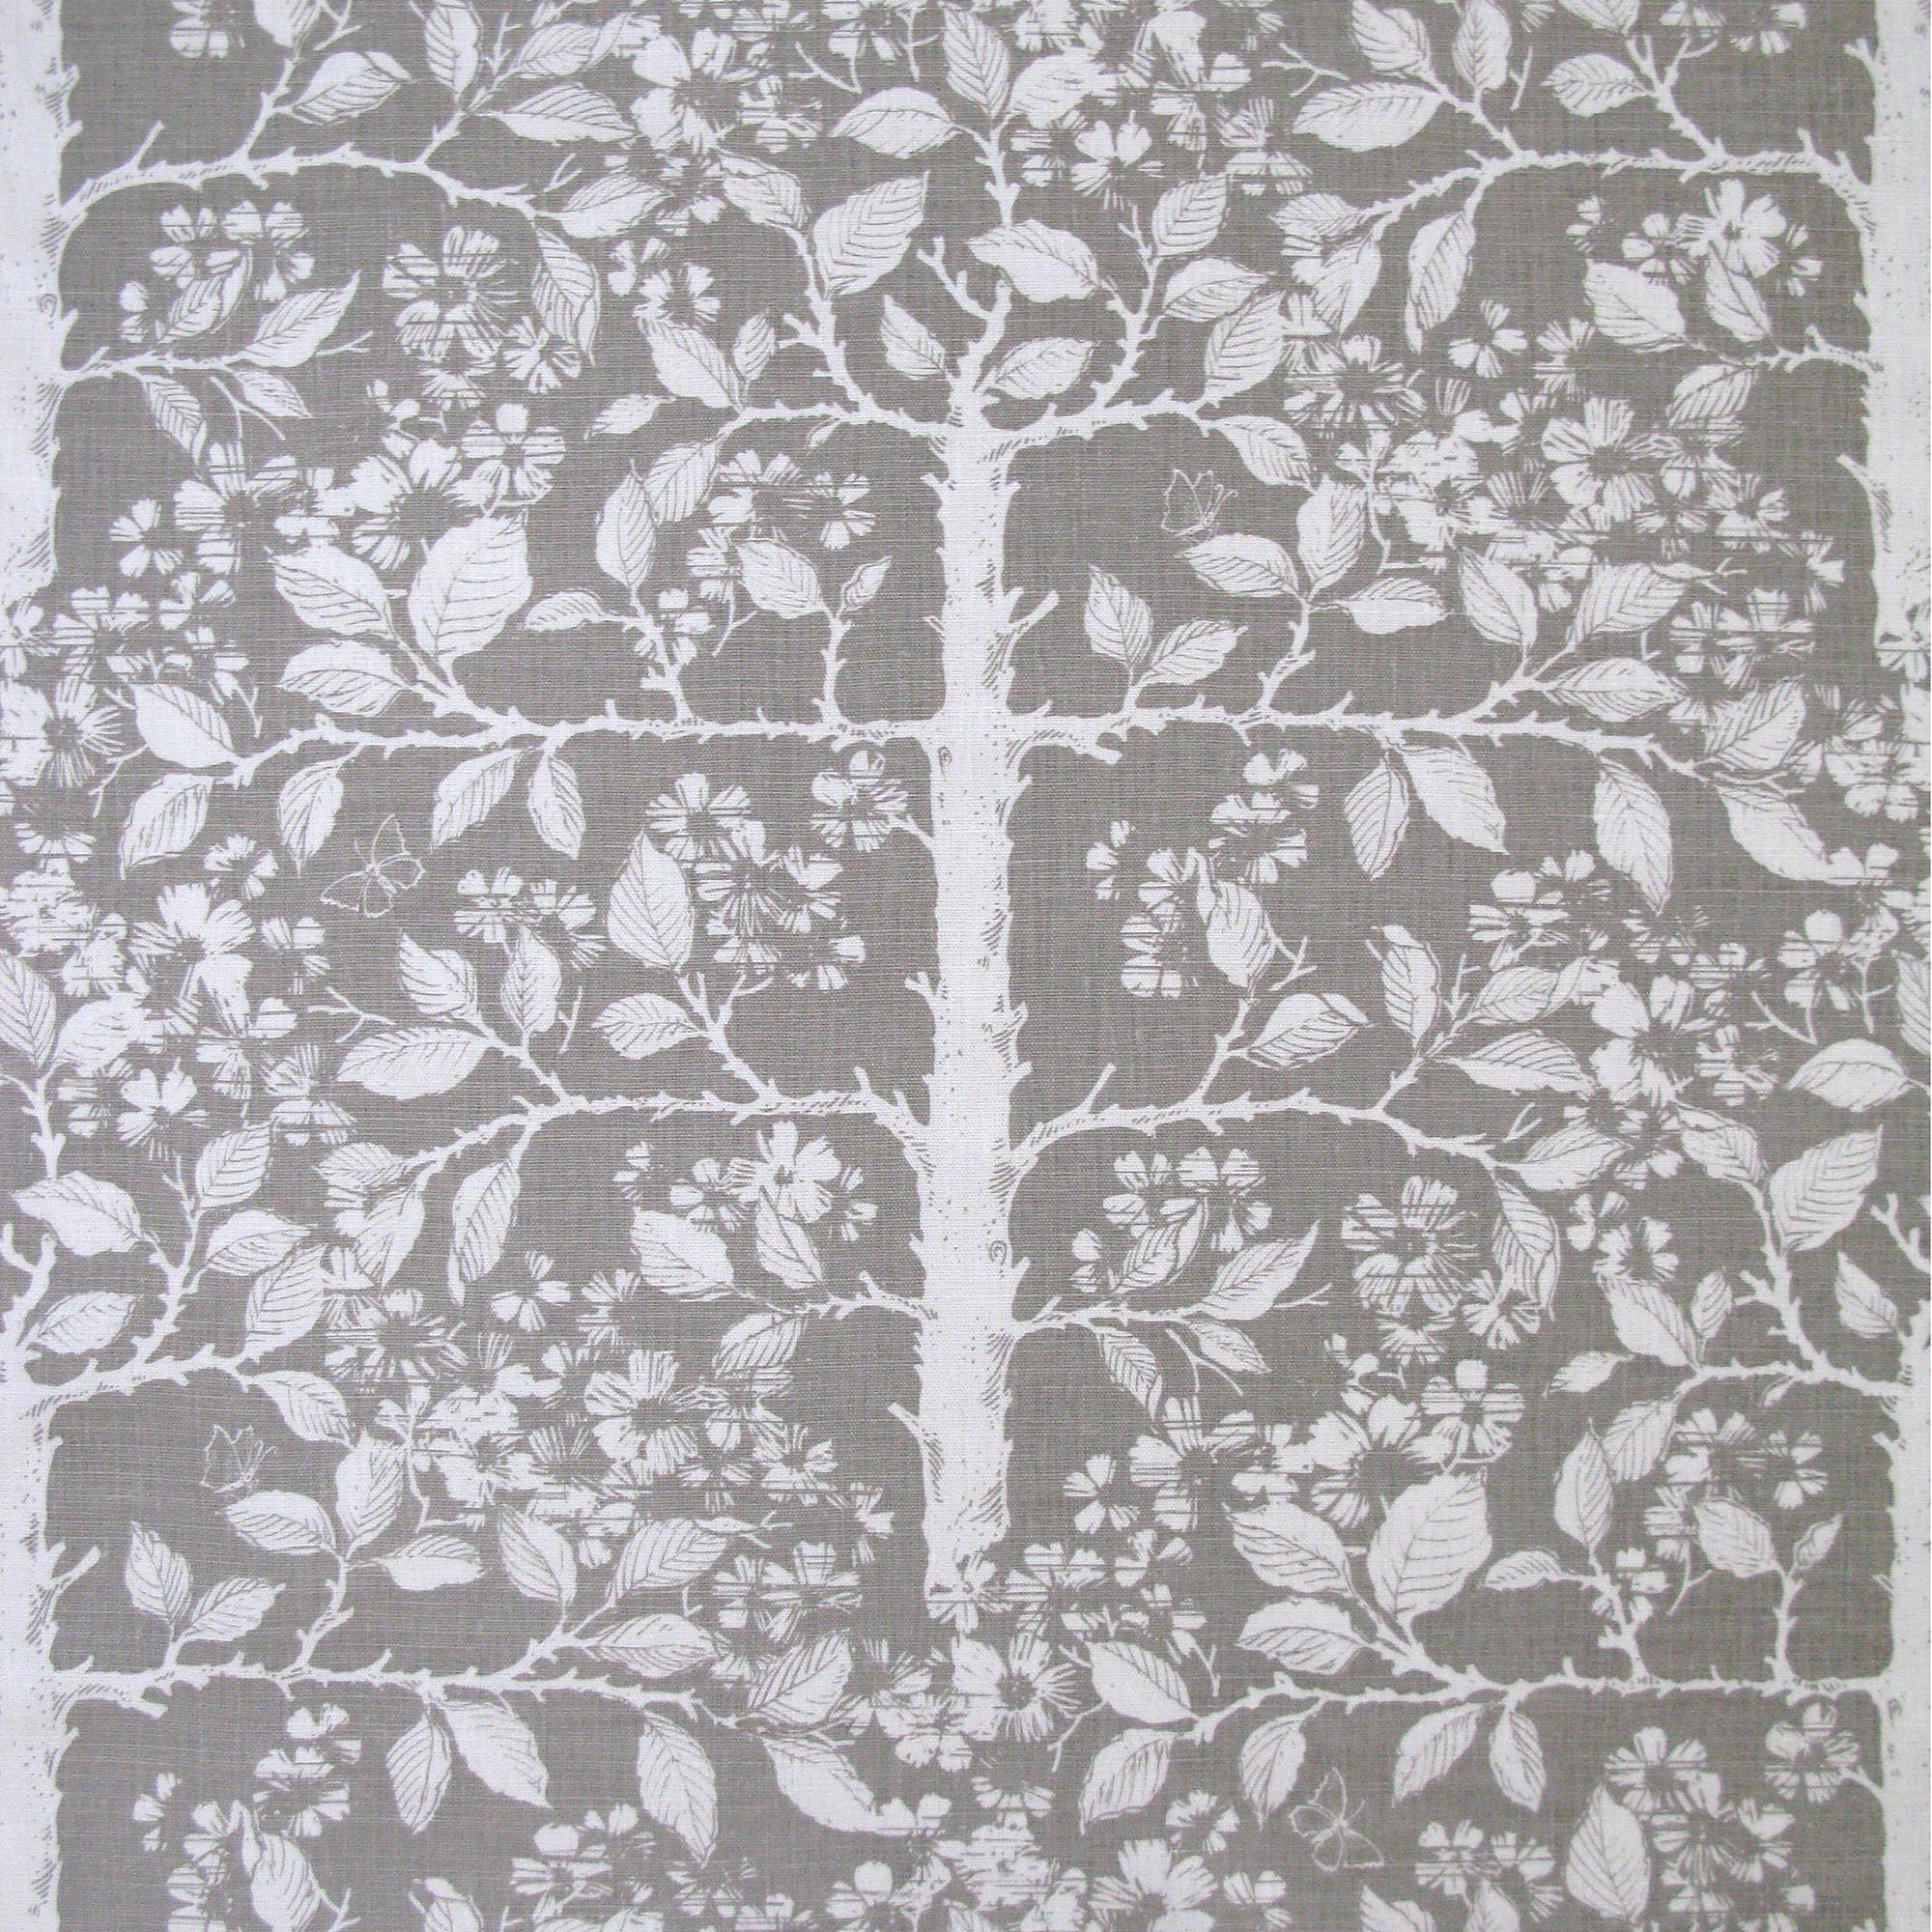 Detail of fabric in a large-scale tree and leaf print in white on a light gray field.